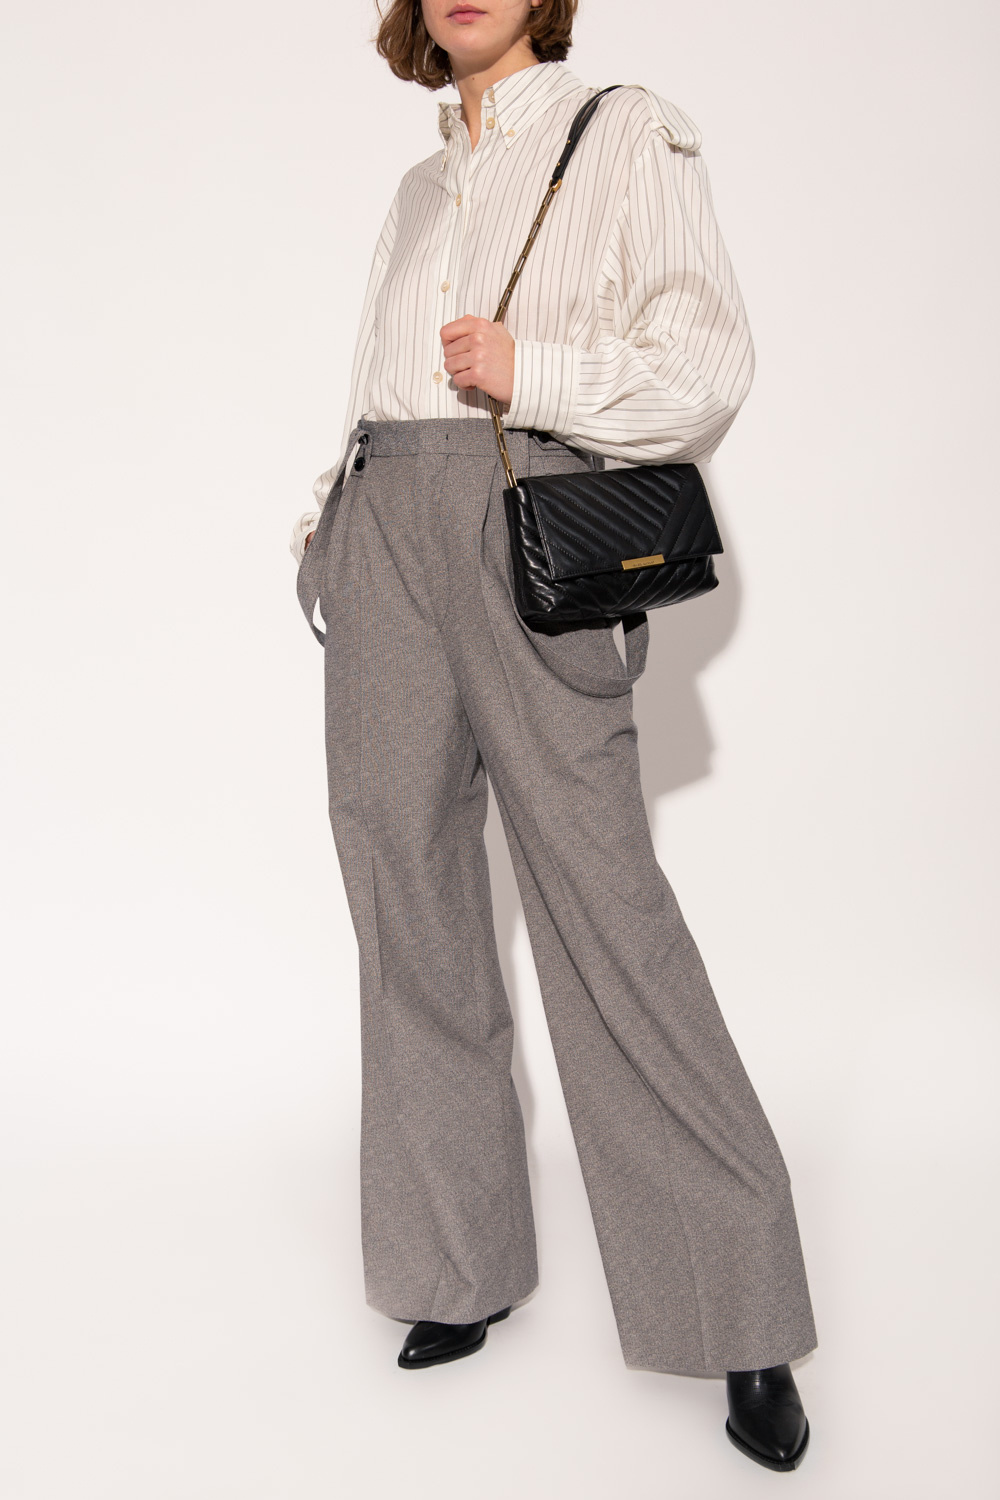 Isabel Marant ’Jessica’ tailored trousers with suspenders